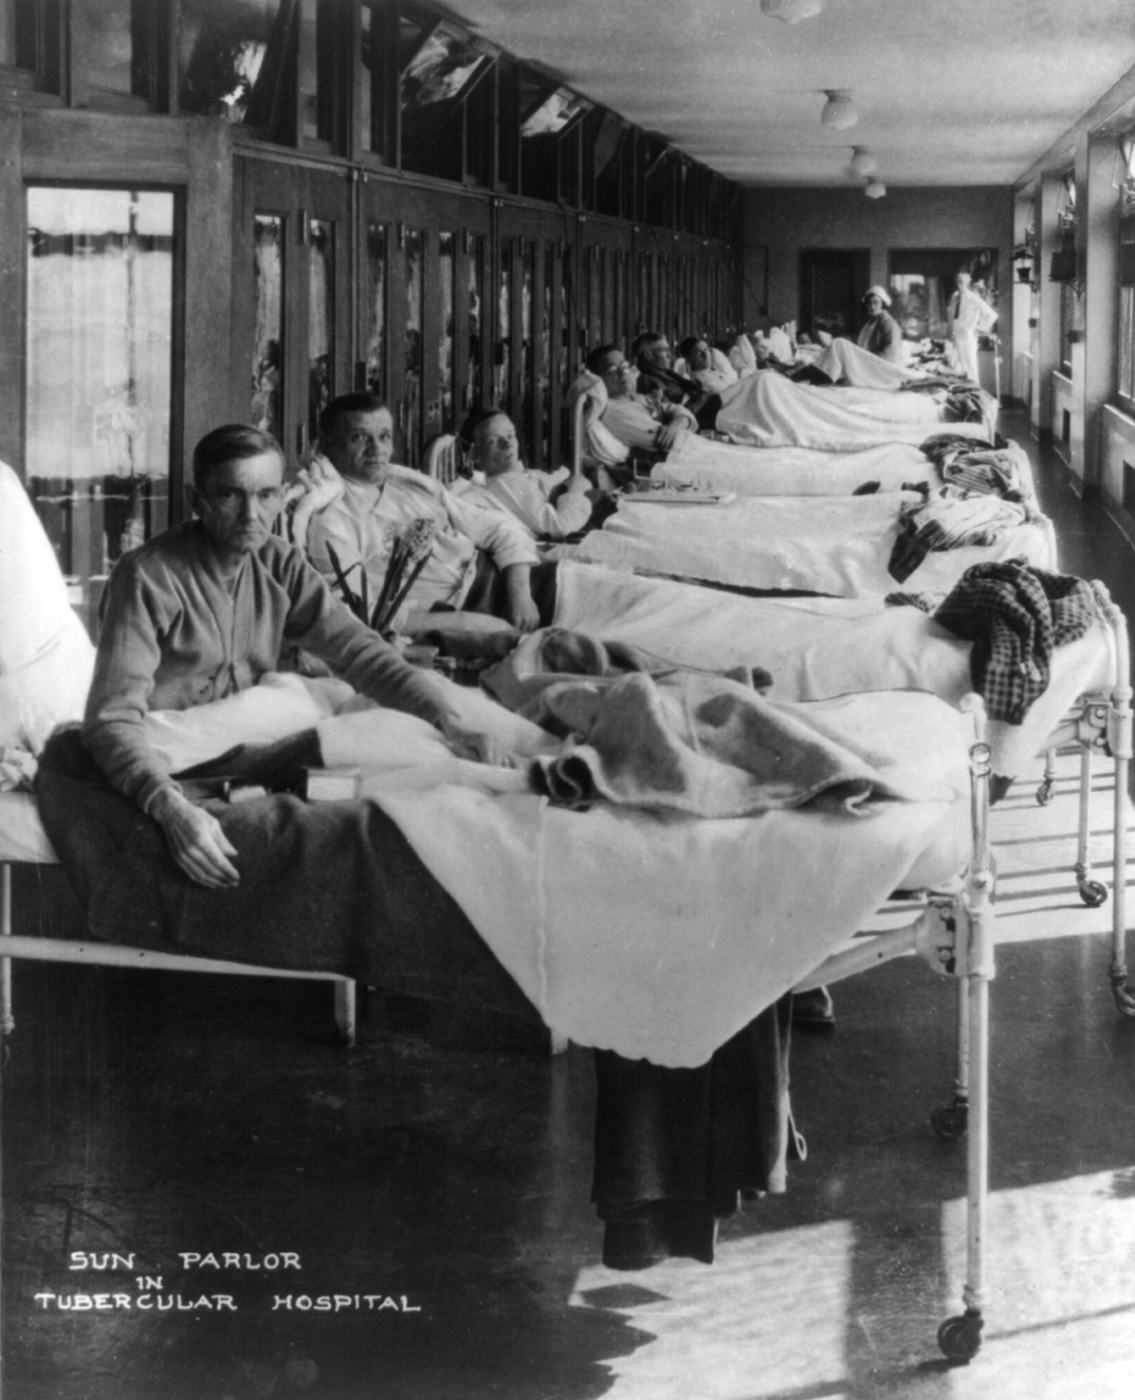 Veterans resting in the sun parlor set up for tuberculosis patients at the Dayton, Ohio, branch of the National Home for Disabled Volunteer Soldiers, c. 1919. Many thousands of service members contracted the highly communicable disease during and after World War I. (Library of Congress).